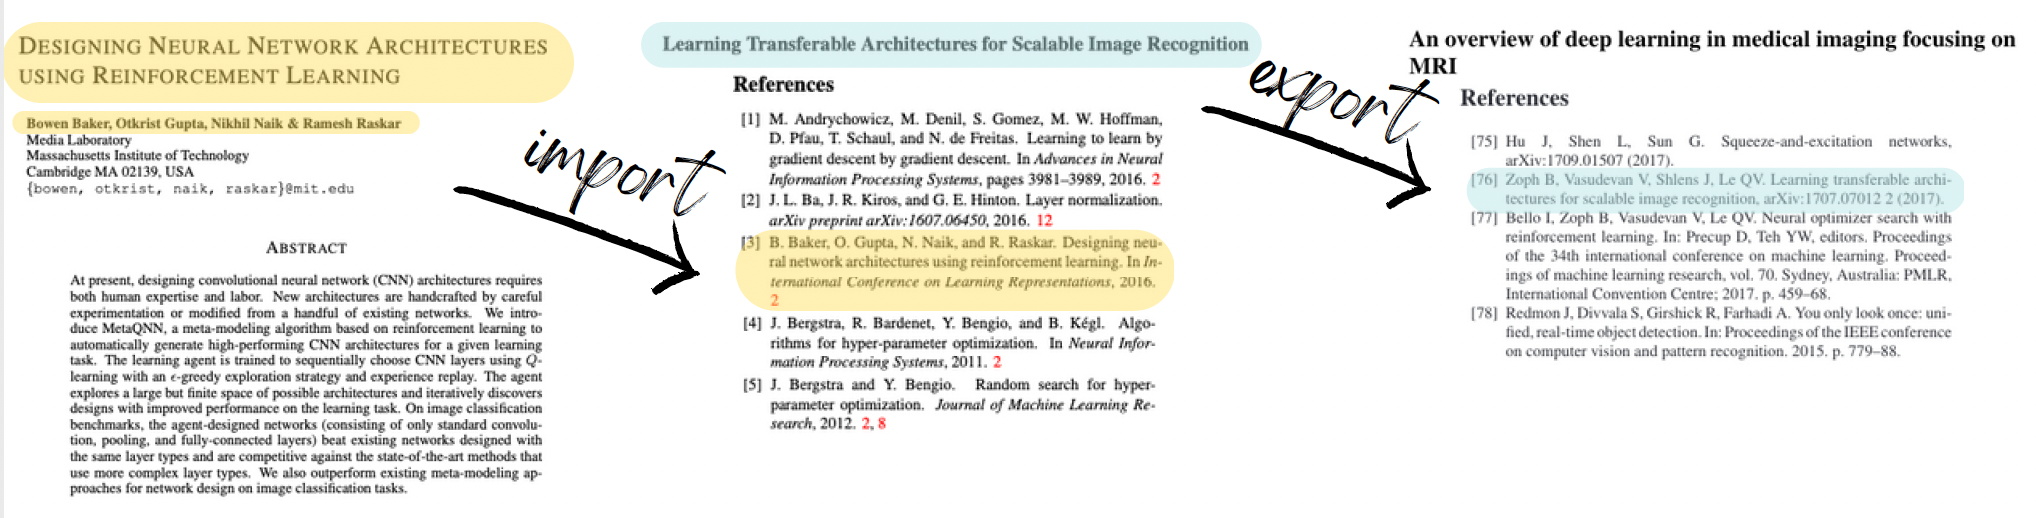 Figure 1, which displays how the publication “Learning Transferable Architecture for Scalable Image Recognition” “imported” information from a previously published paper and “exported” information that was used in support of research from a subsequently published paper.